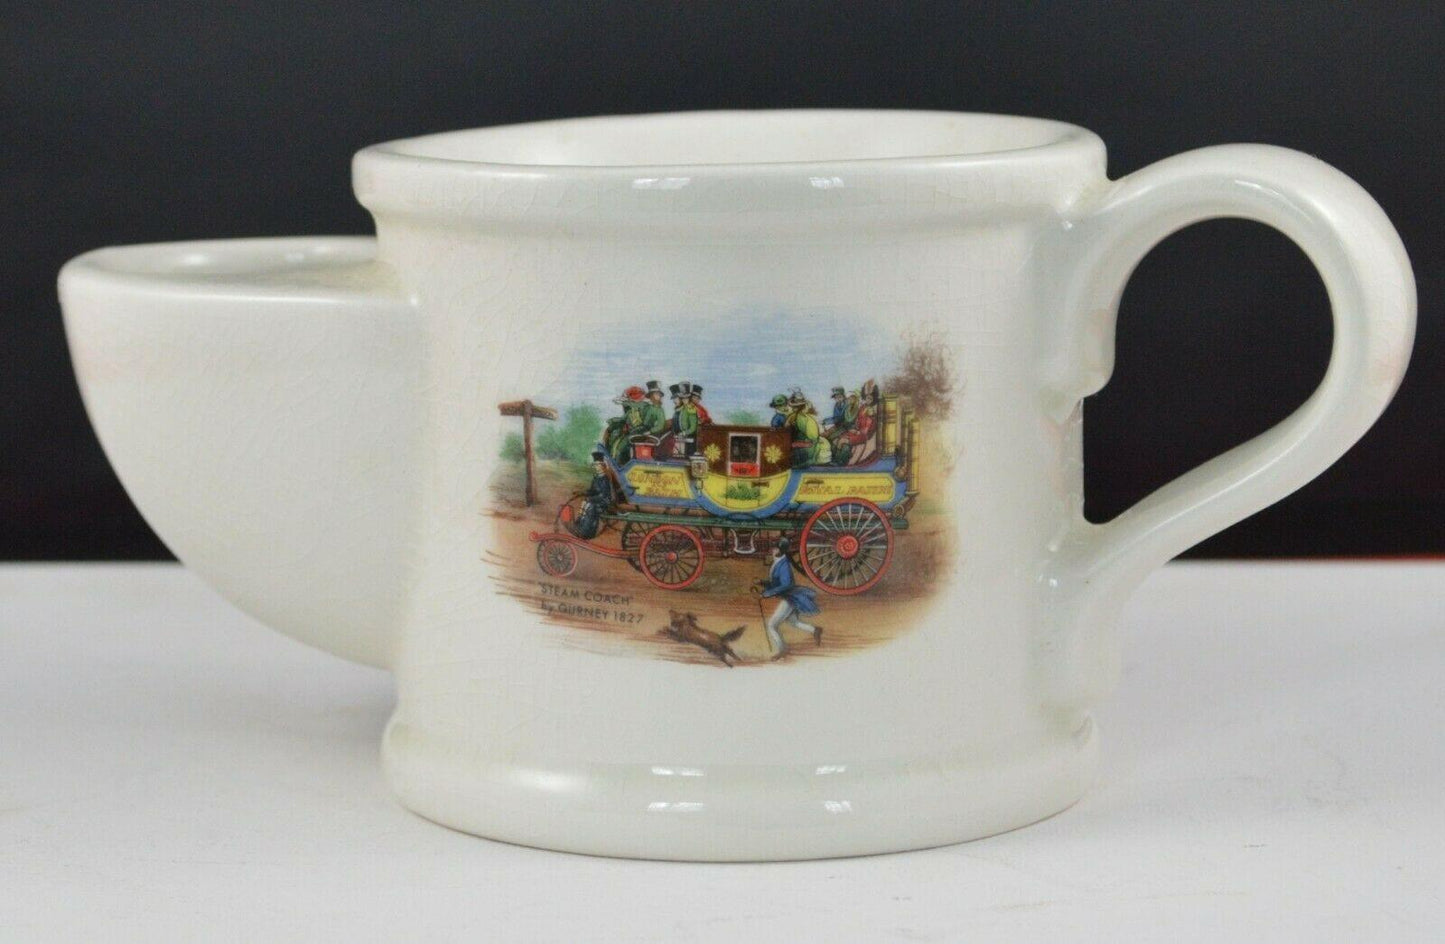 SHAVING MUG WITH STEAM COACH by GURNEY 1827 DEPICTED ON THE FRONT(PREVIOUSLY OWNED) GOOD CONDITION HEAVILY CRAZED - TMD167207